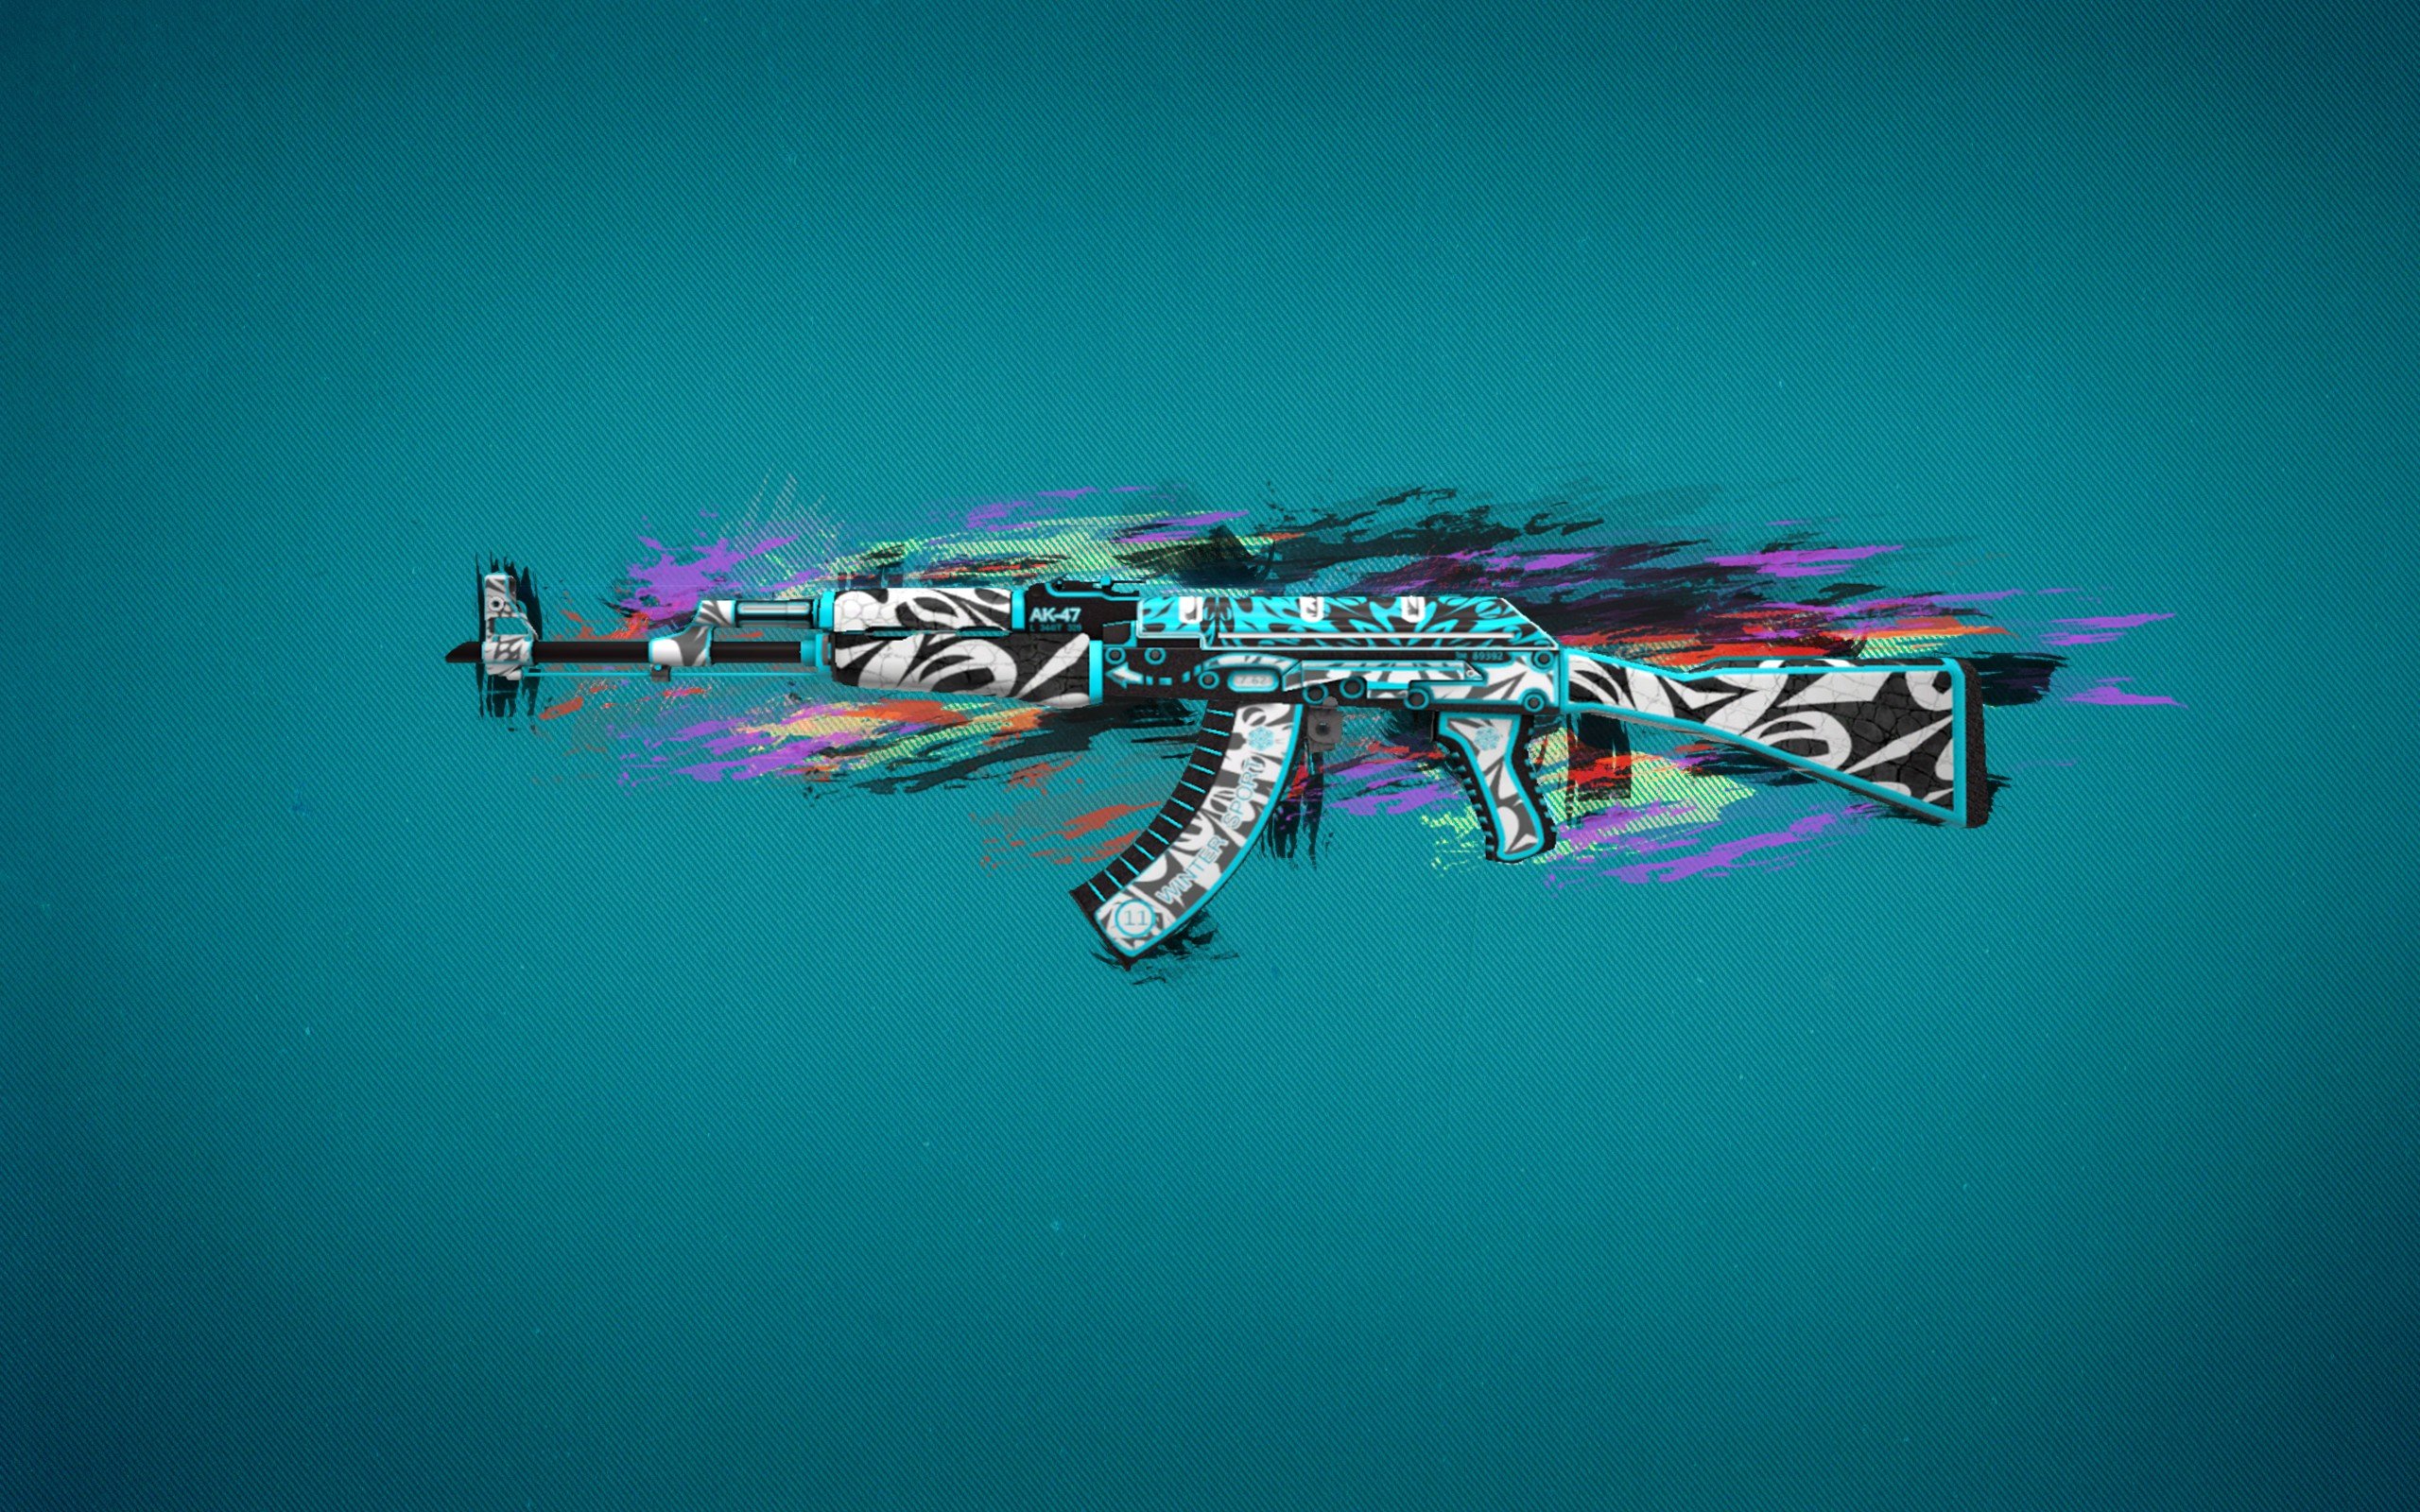 Frontside Misty, AK 47, Counter Strike: Global Offensive, Colorful